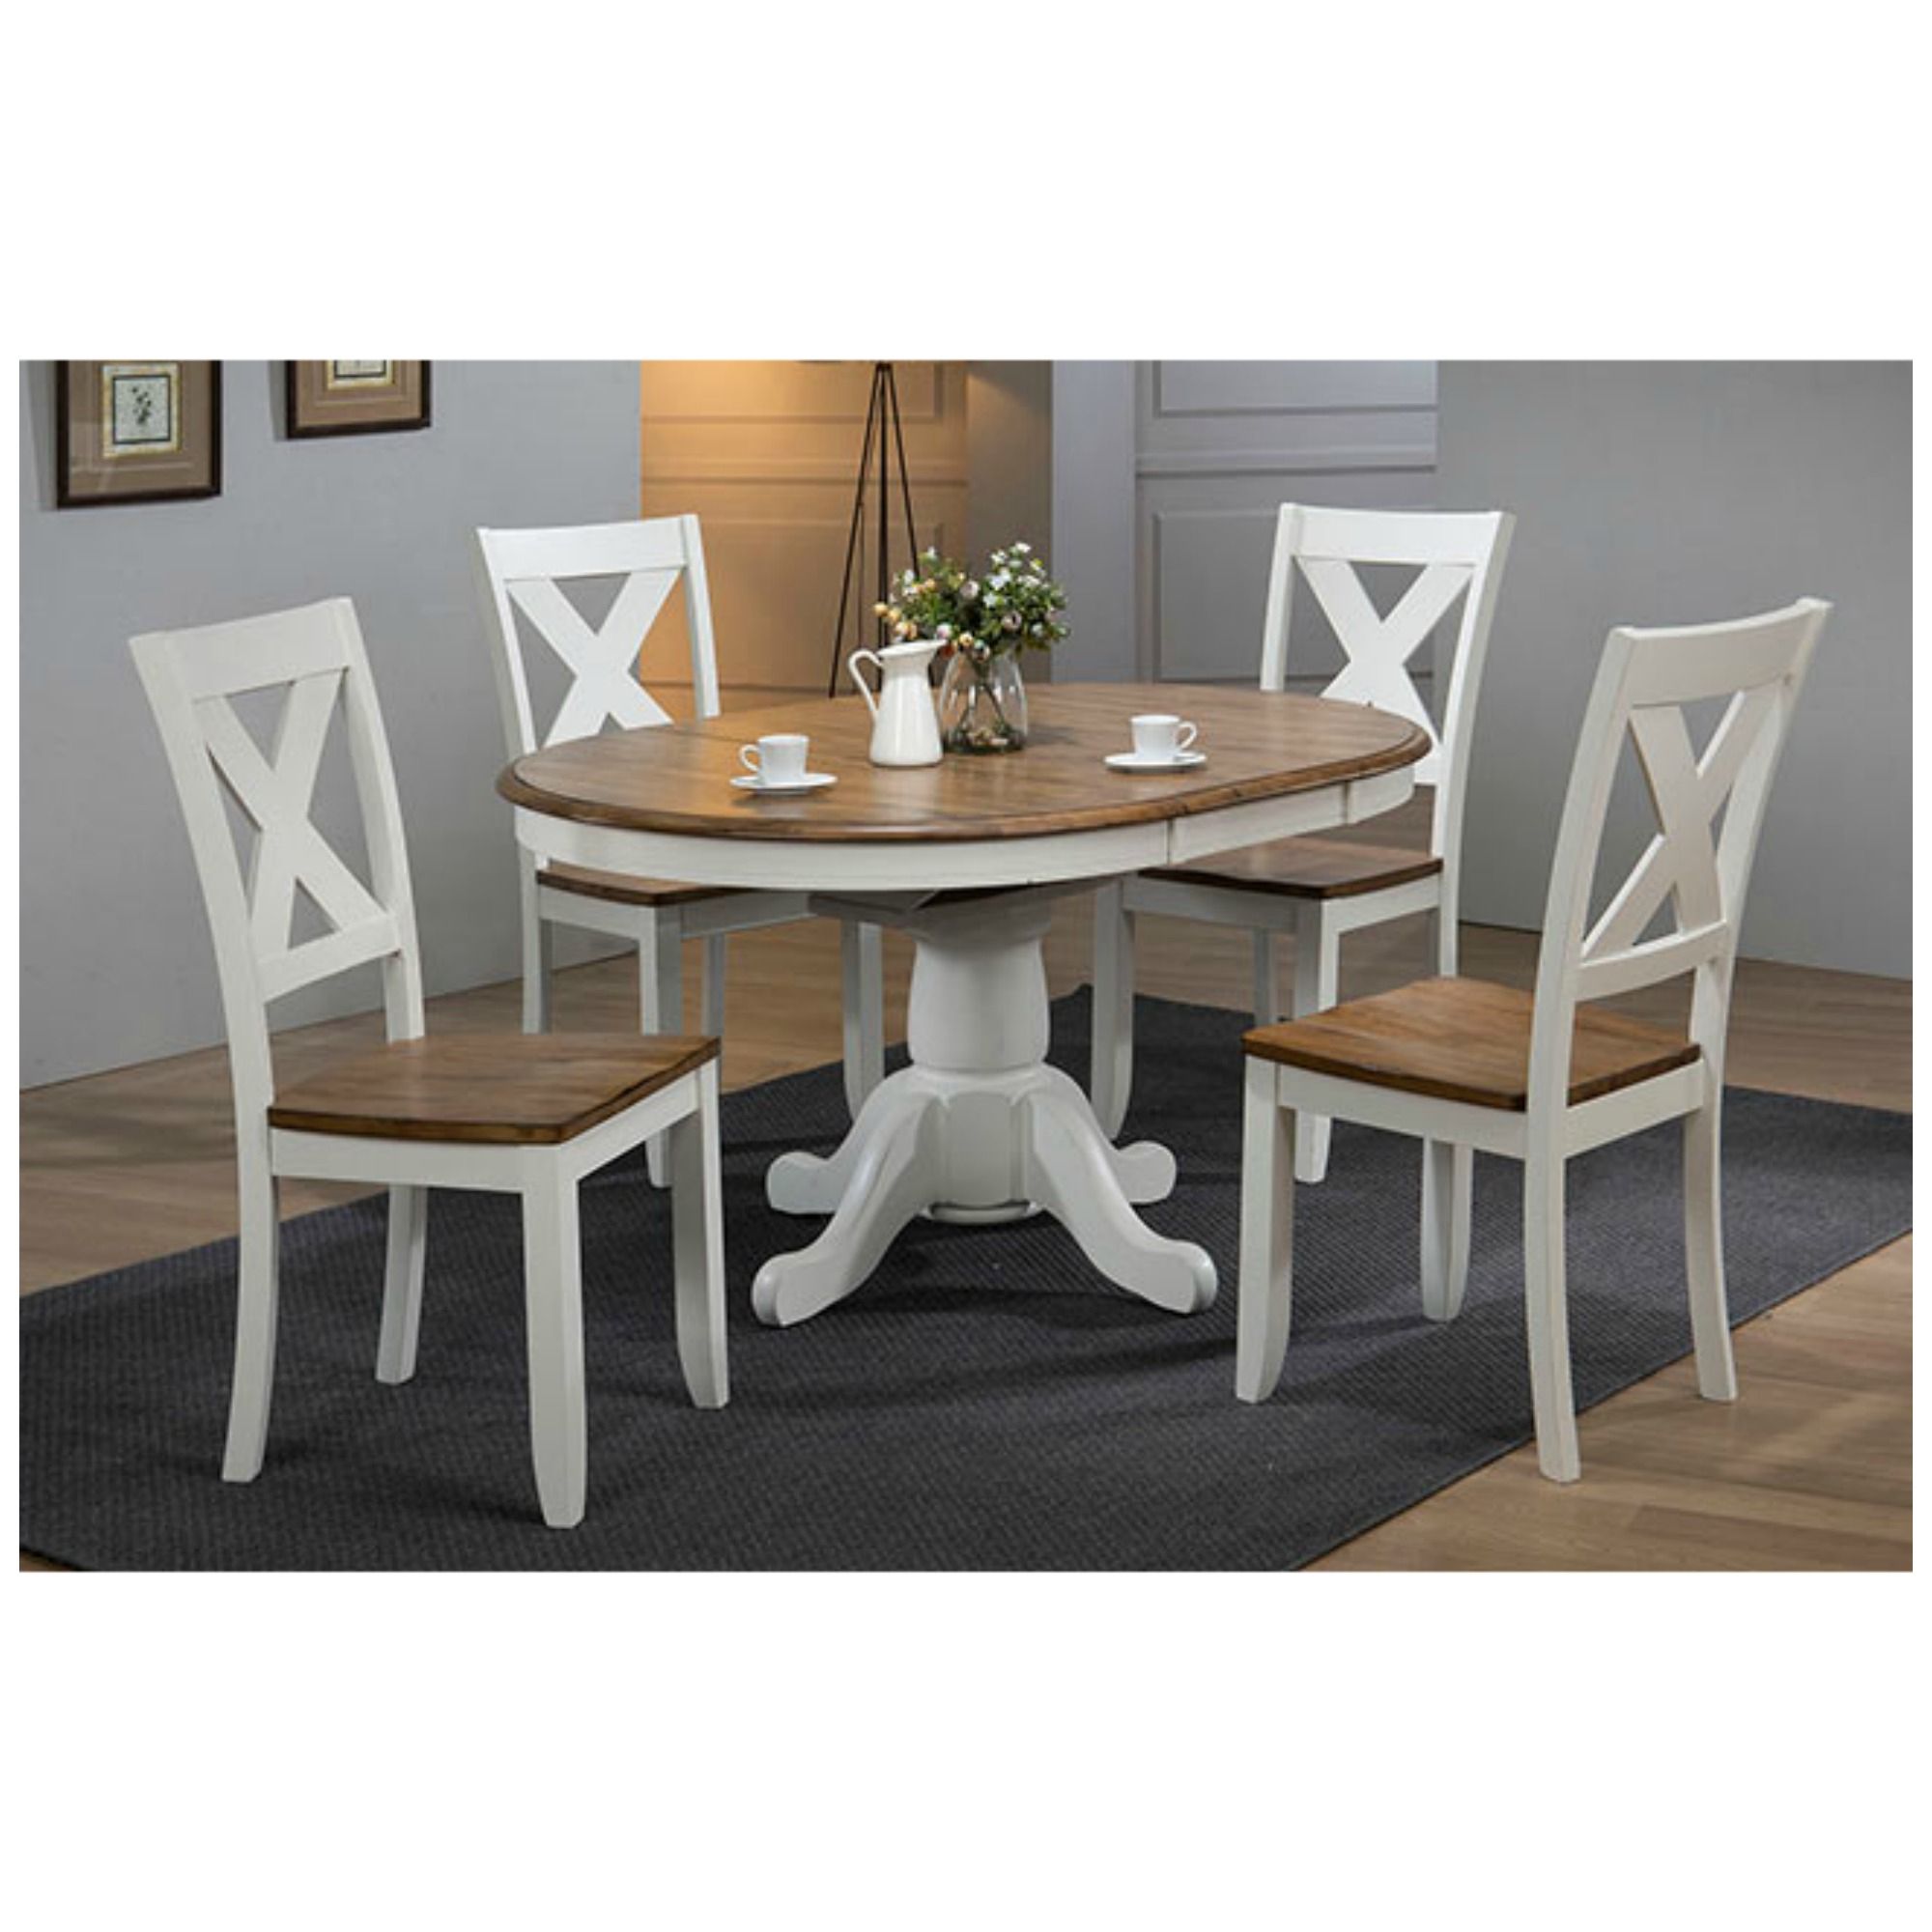 Well Liked Pacifica 5 Piece Dining Set (rustic Brown/white) With Regard To Villani Drop Leaf Rubberwood Solid Wood Pedestal Dining Tables (View 11 of 20)